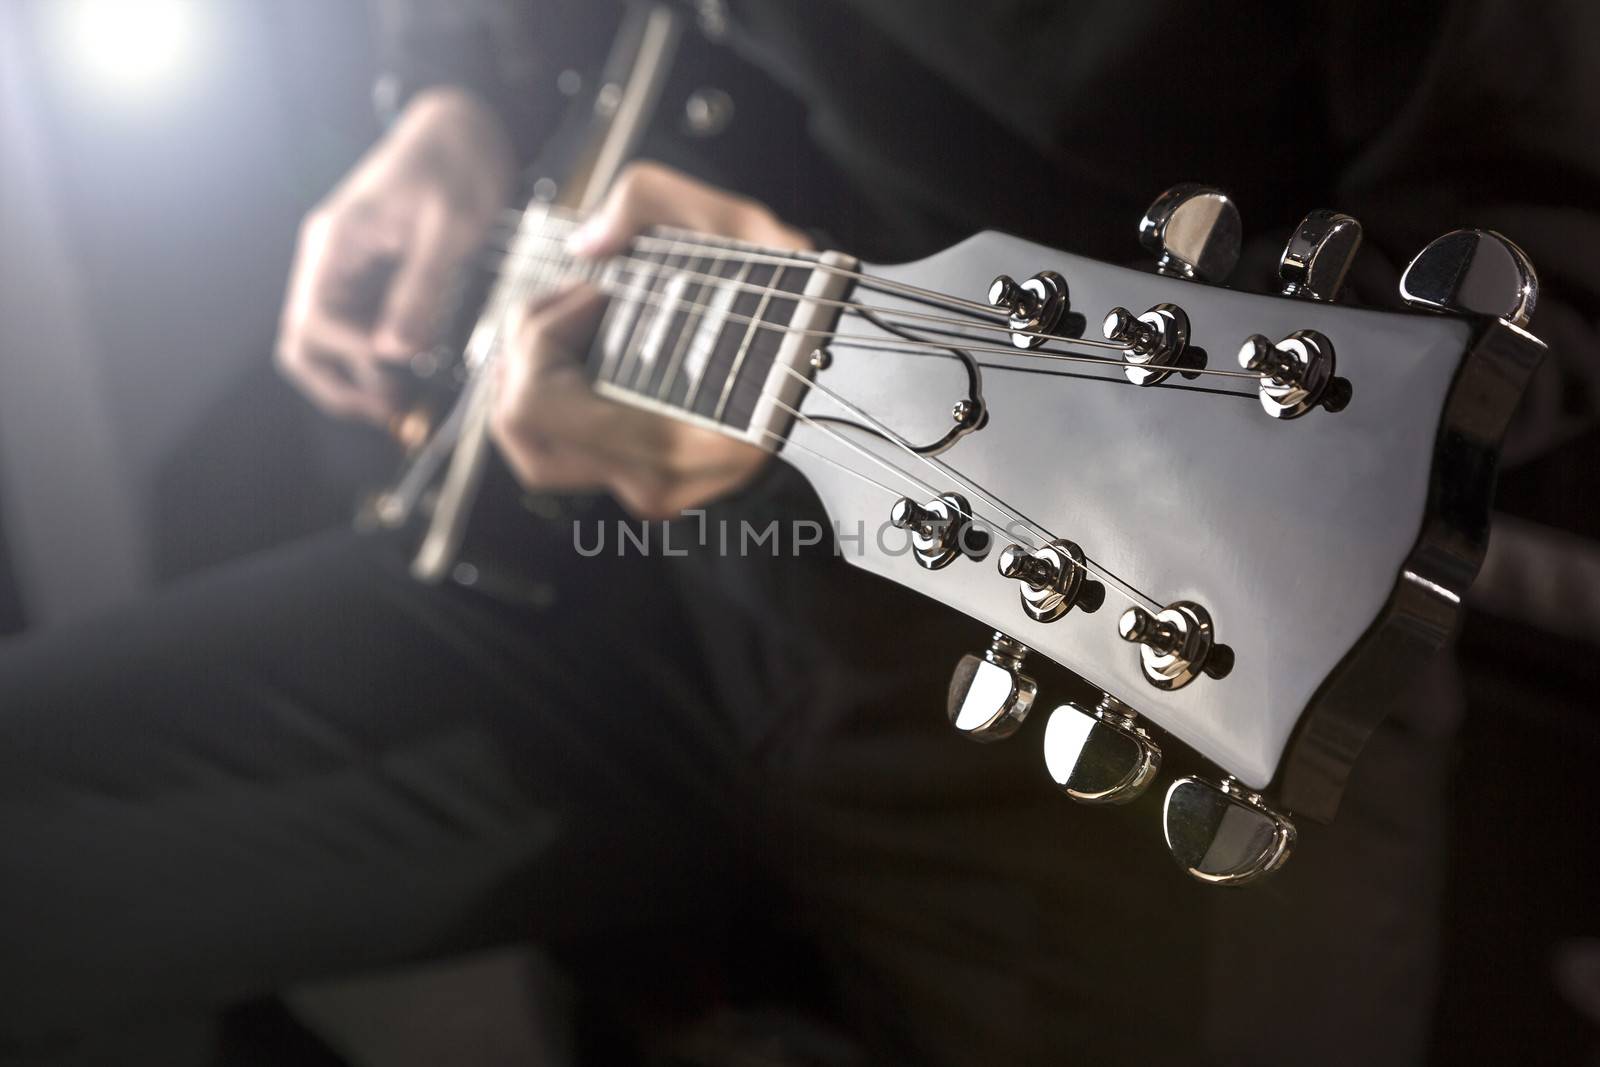 Close up of a man playing a guitar with spot light behind.